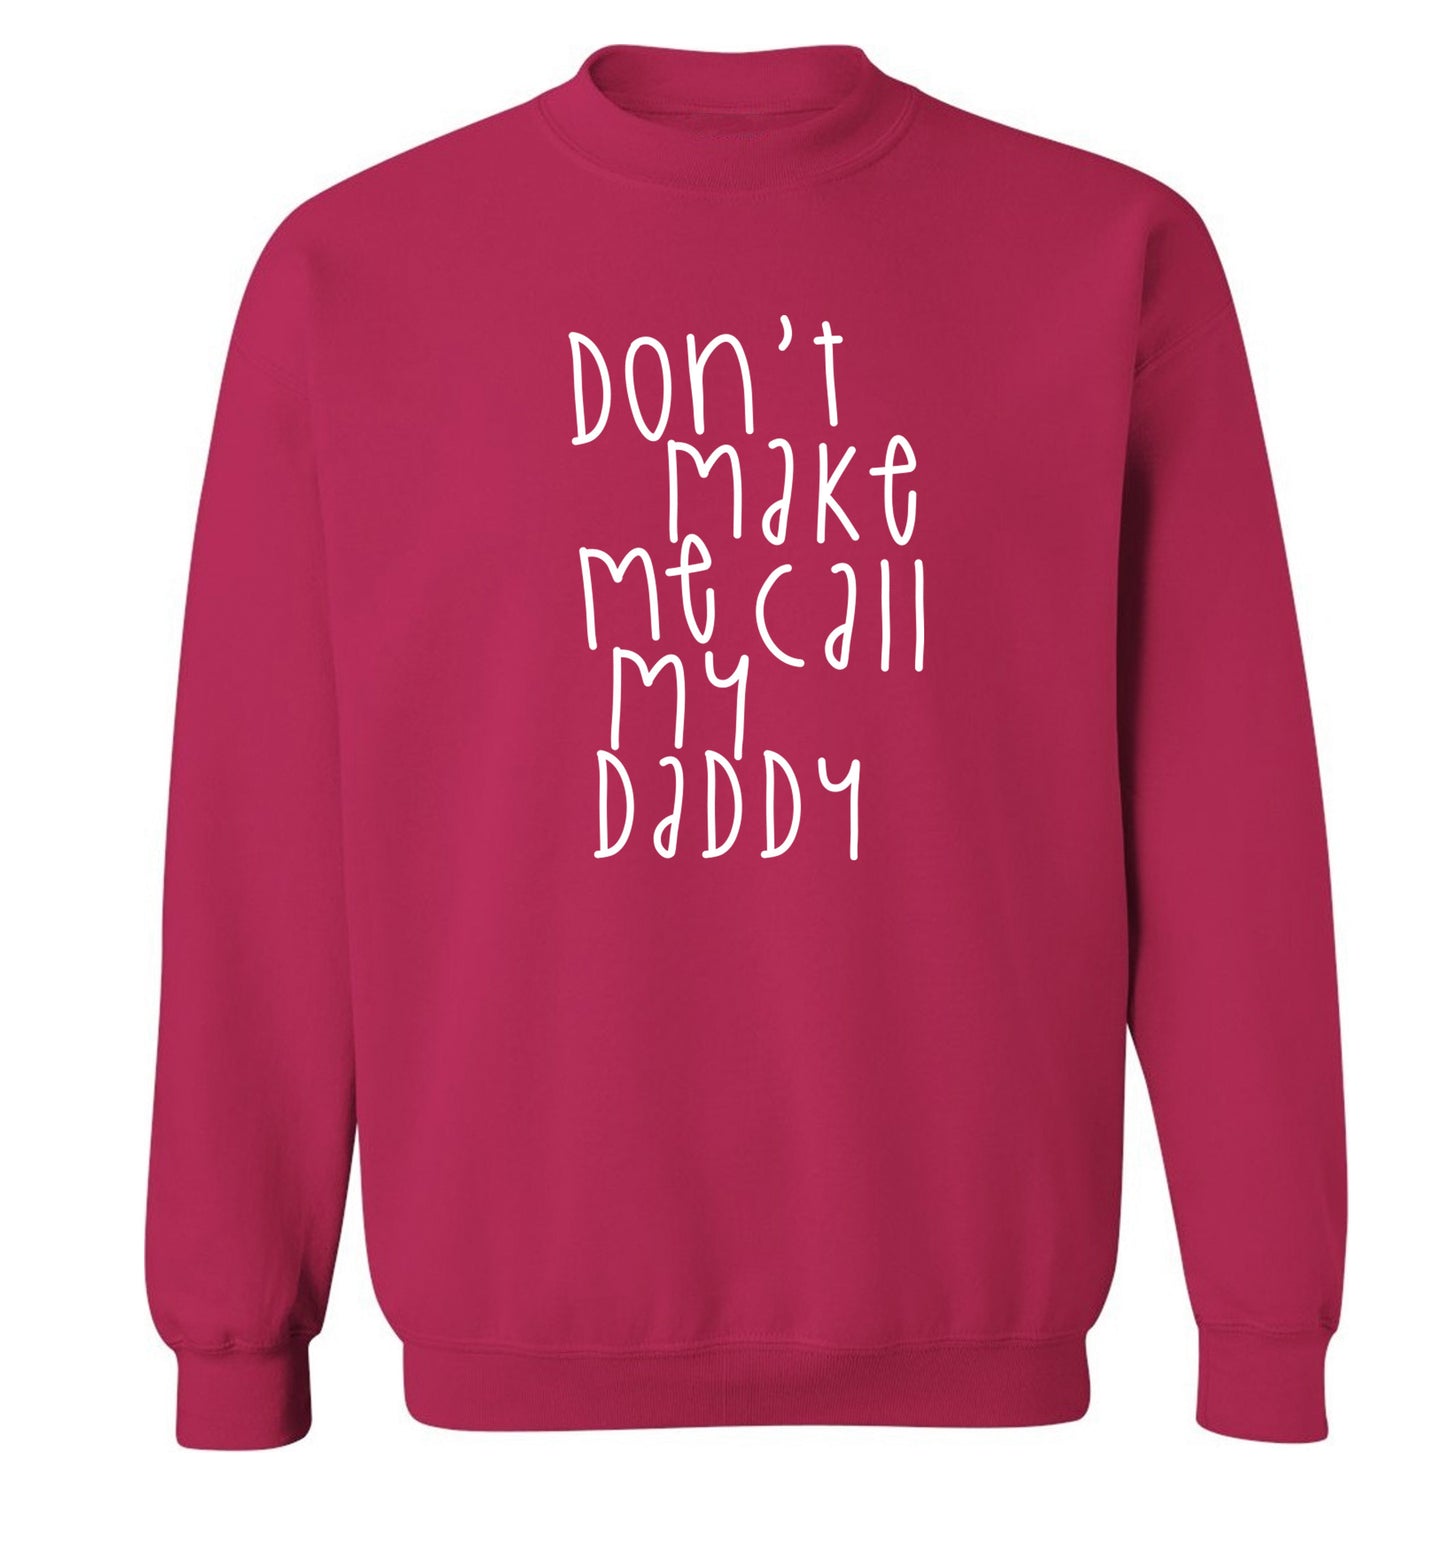 Don't make me call my daddy Adult's unisex pink Sweater 2XL